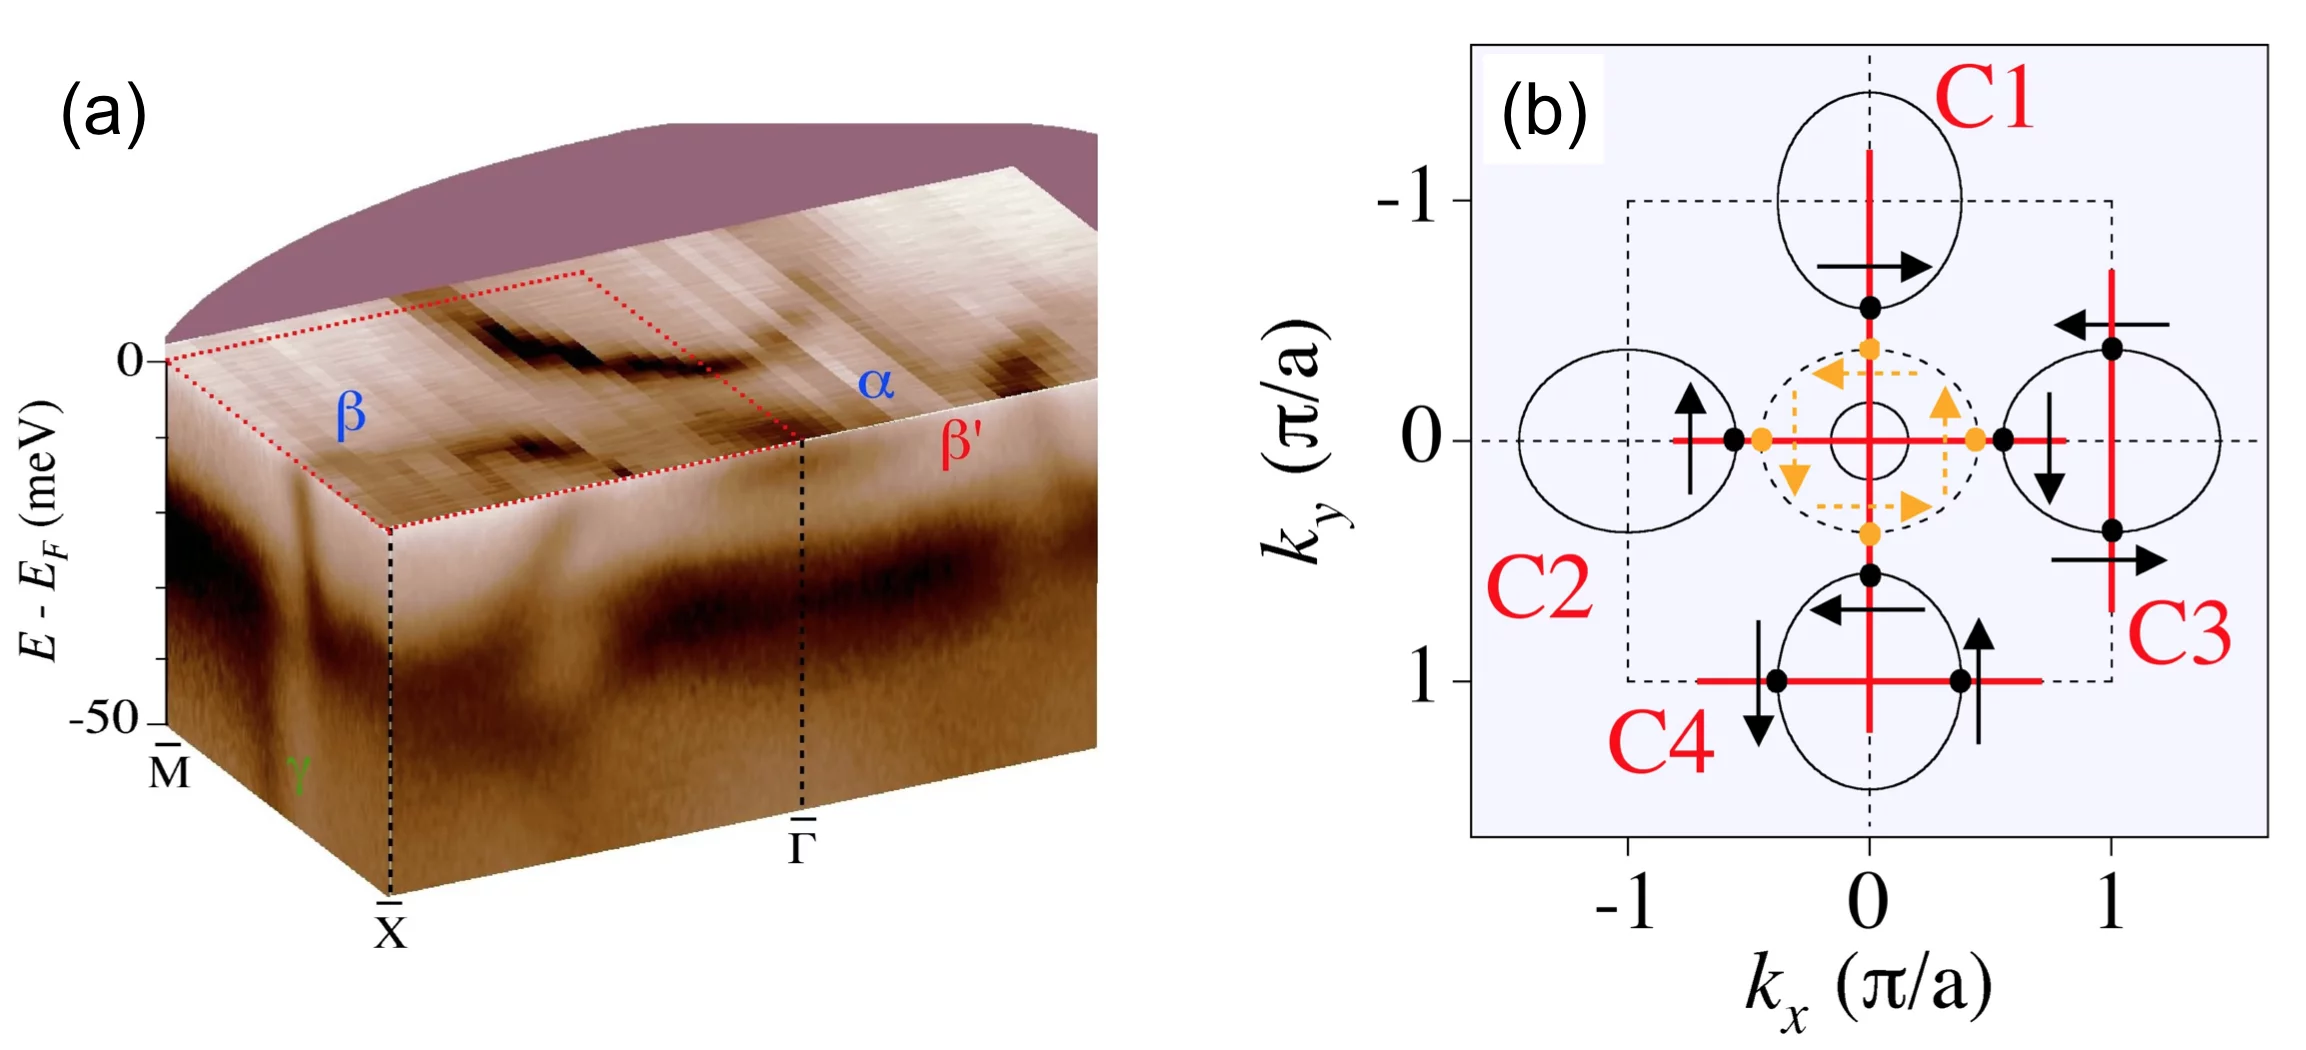 Figure 1: Experimentally determined electronic structure (a) and spin textured (b) of the topological Kondo insulator candidate SmB6